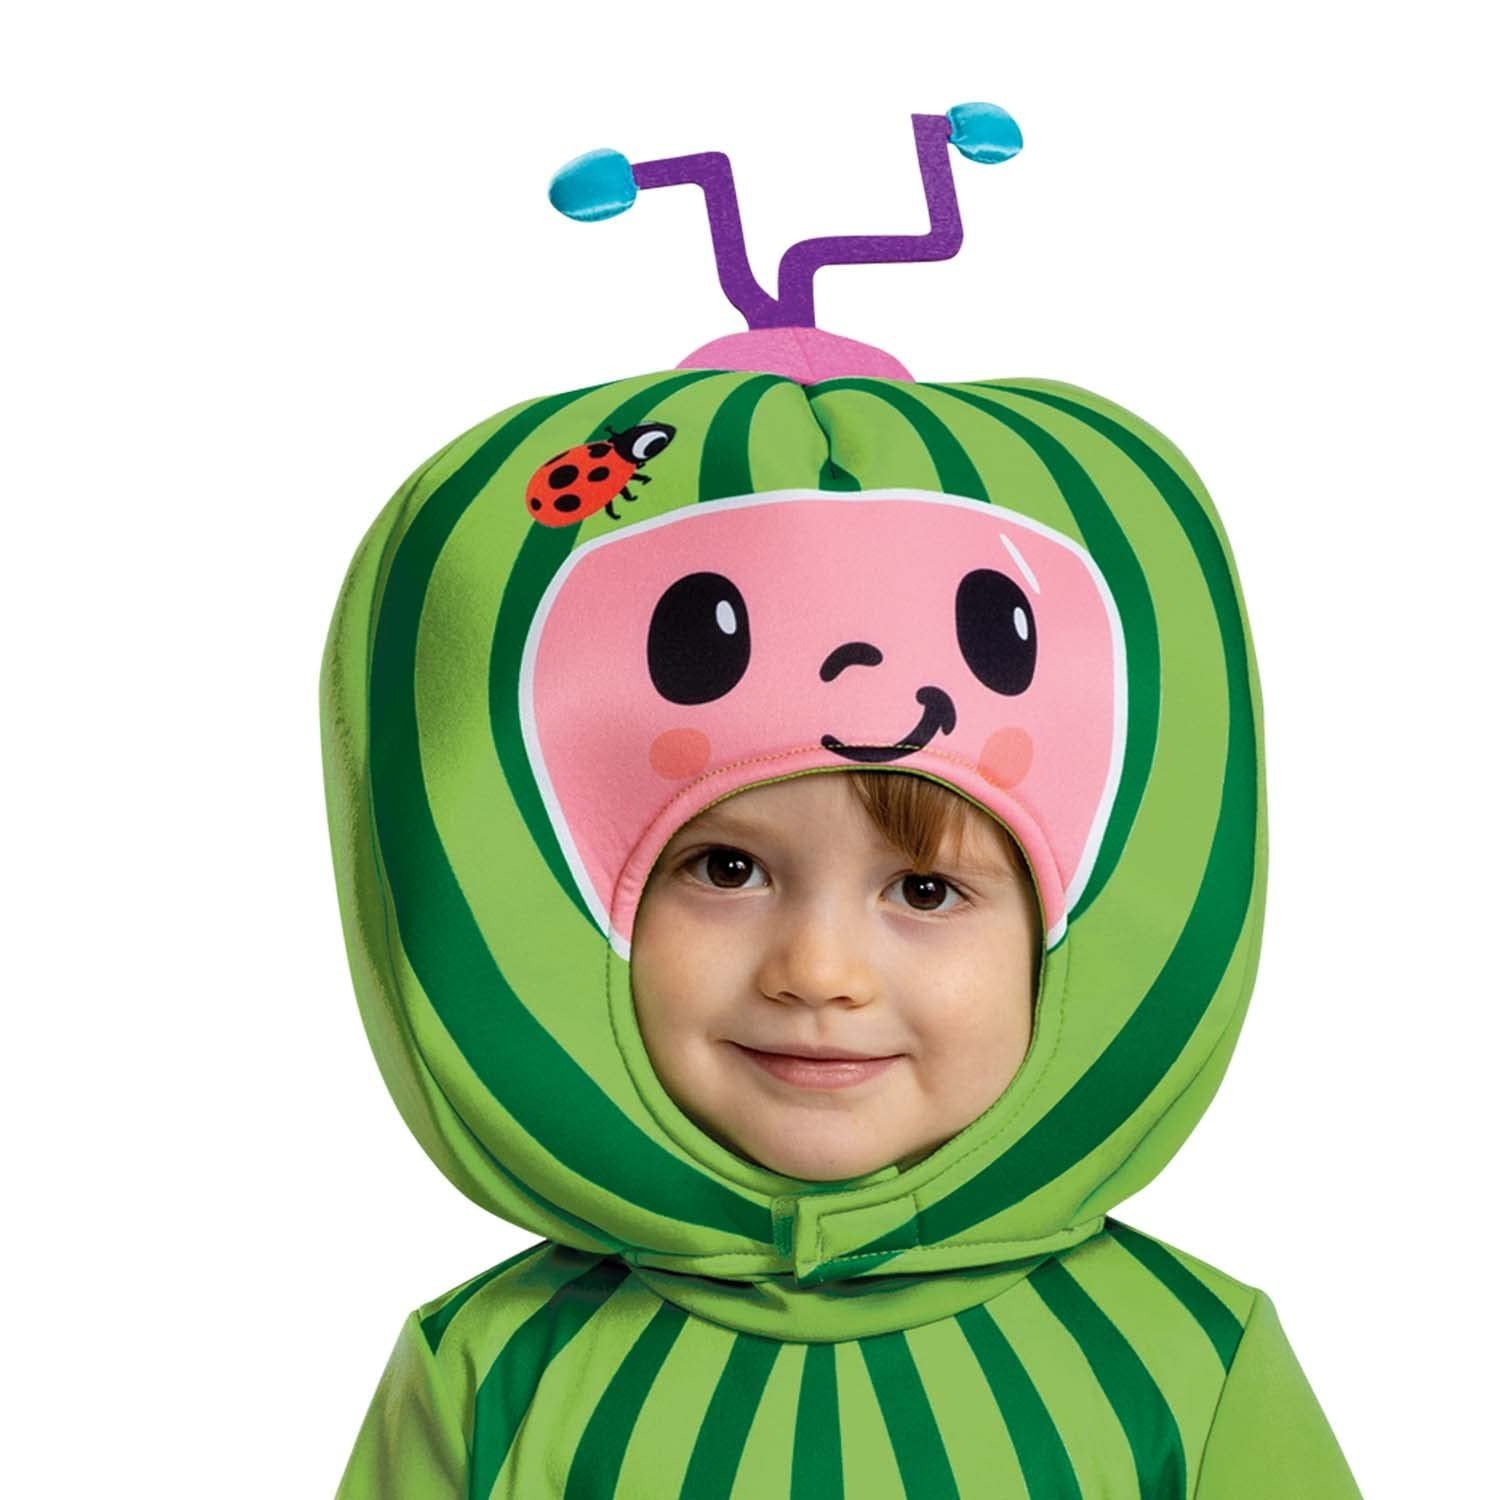 Disguise Cocomelon Costume for Kids, Official Cocomelon Costume Watermelon Headpiece, Toddler Size Small (2T)